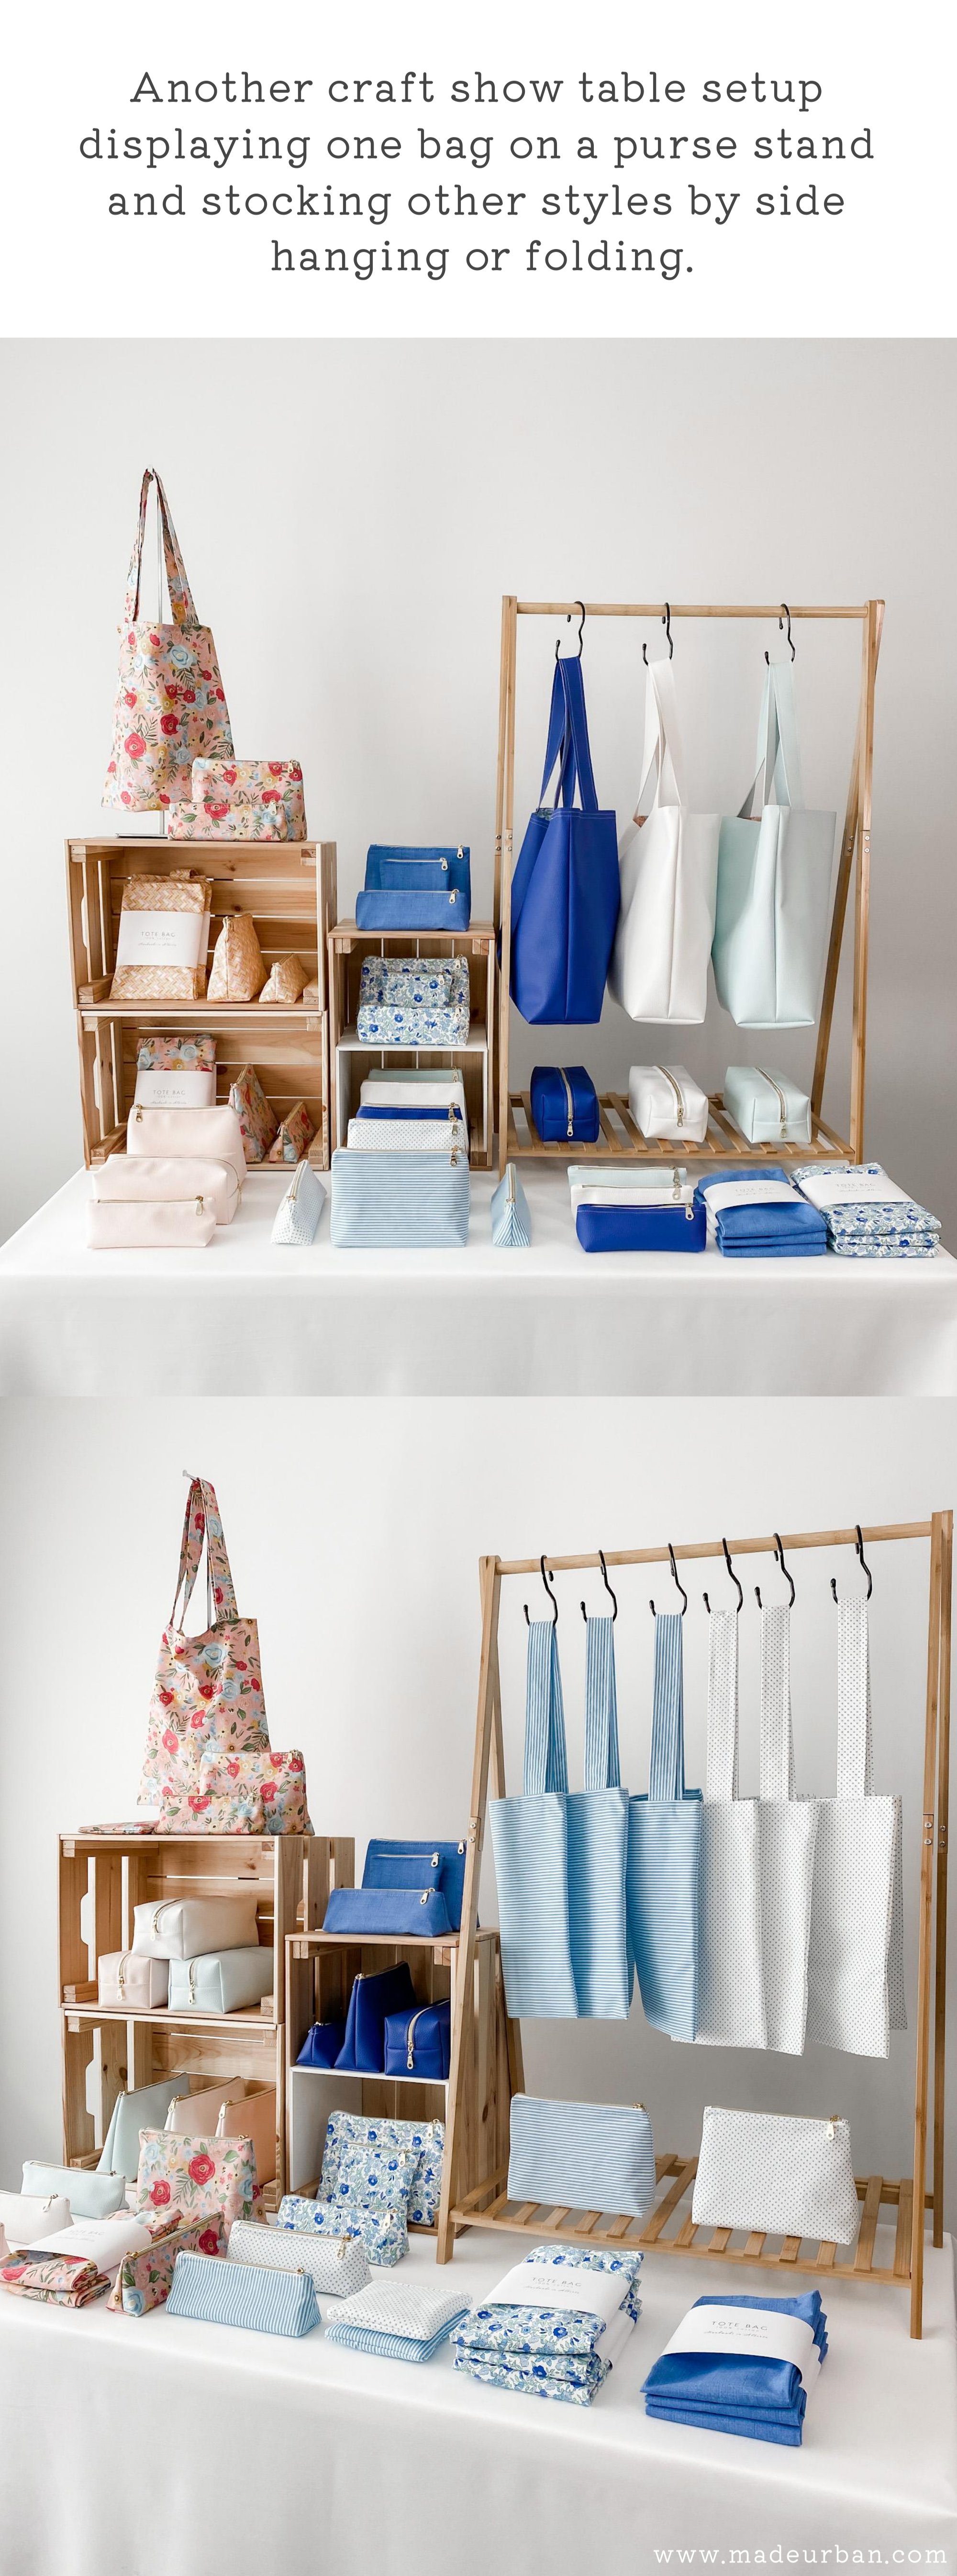 Kids' clothes rack to display tote bags at a craft show